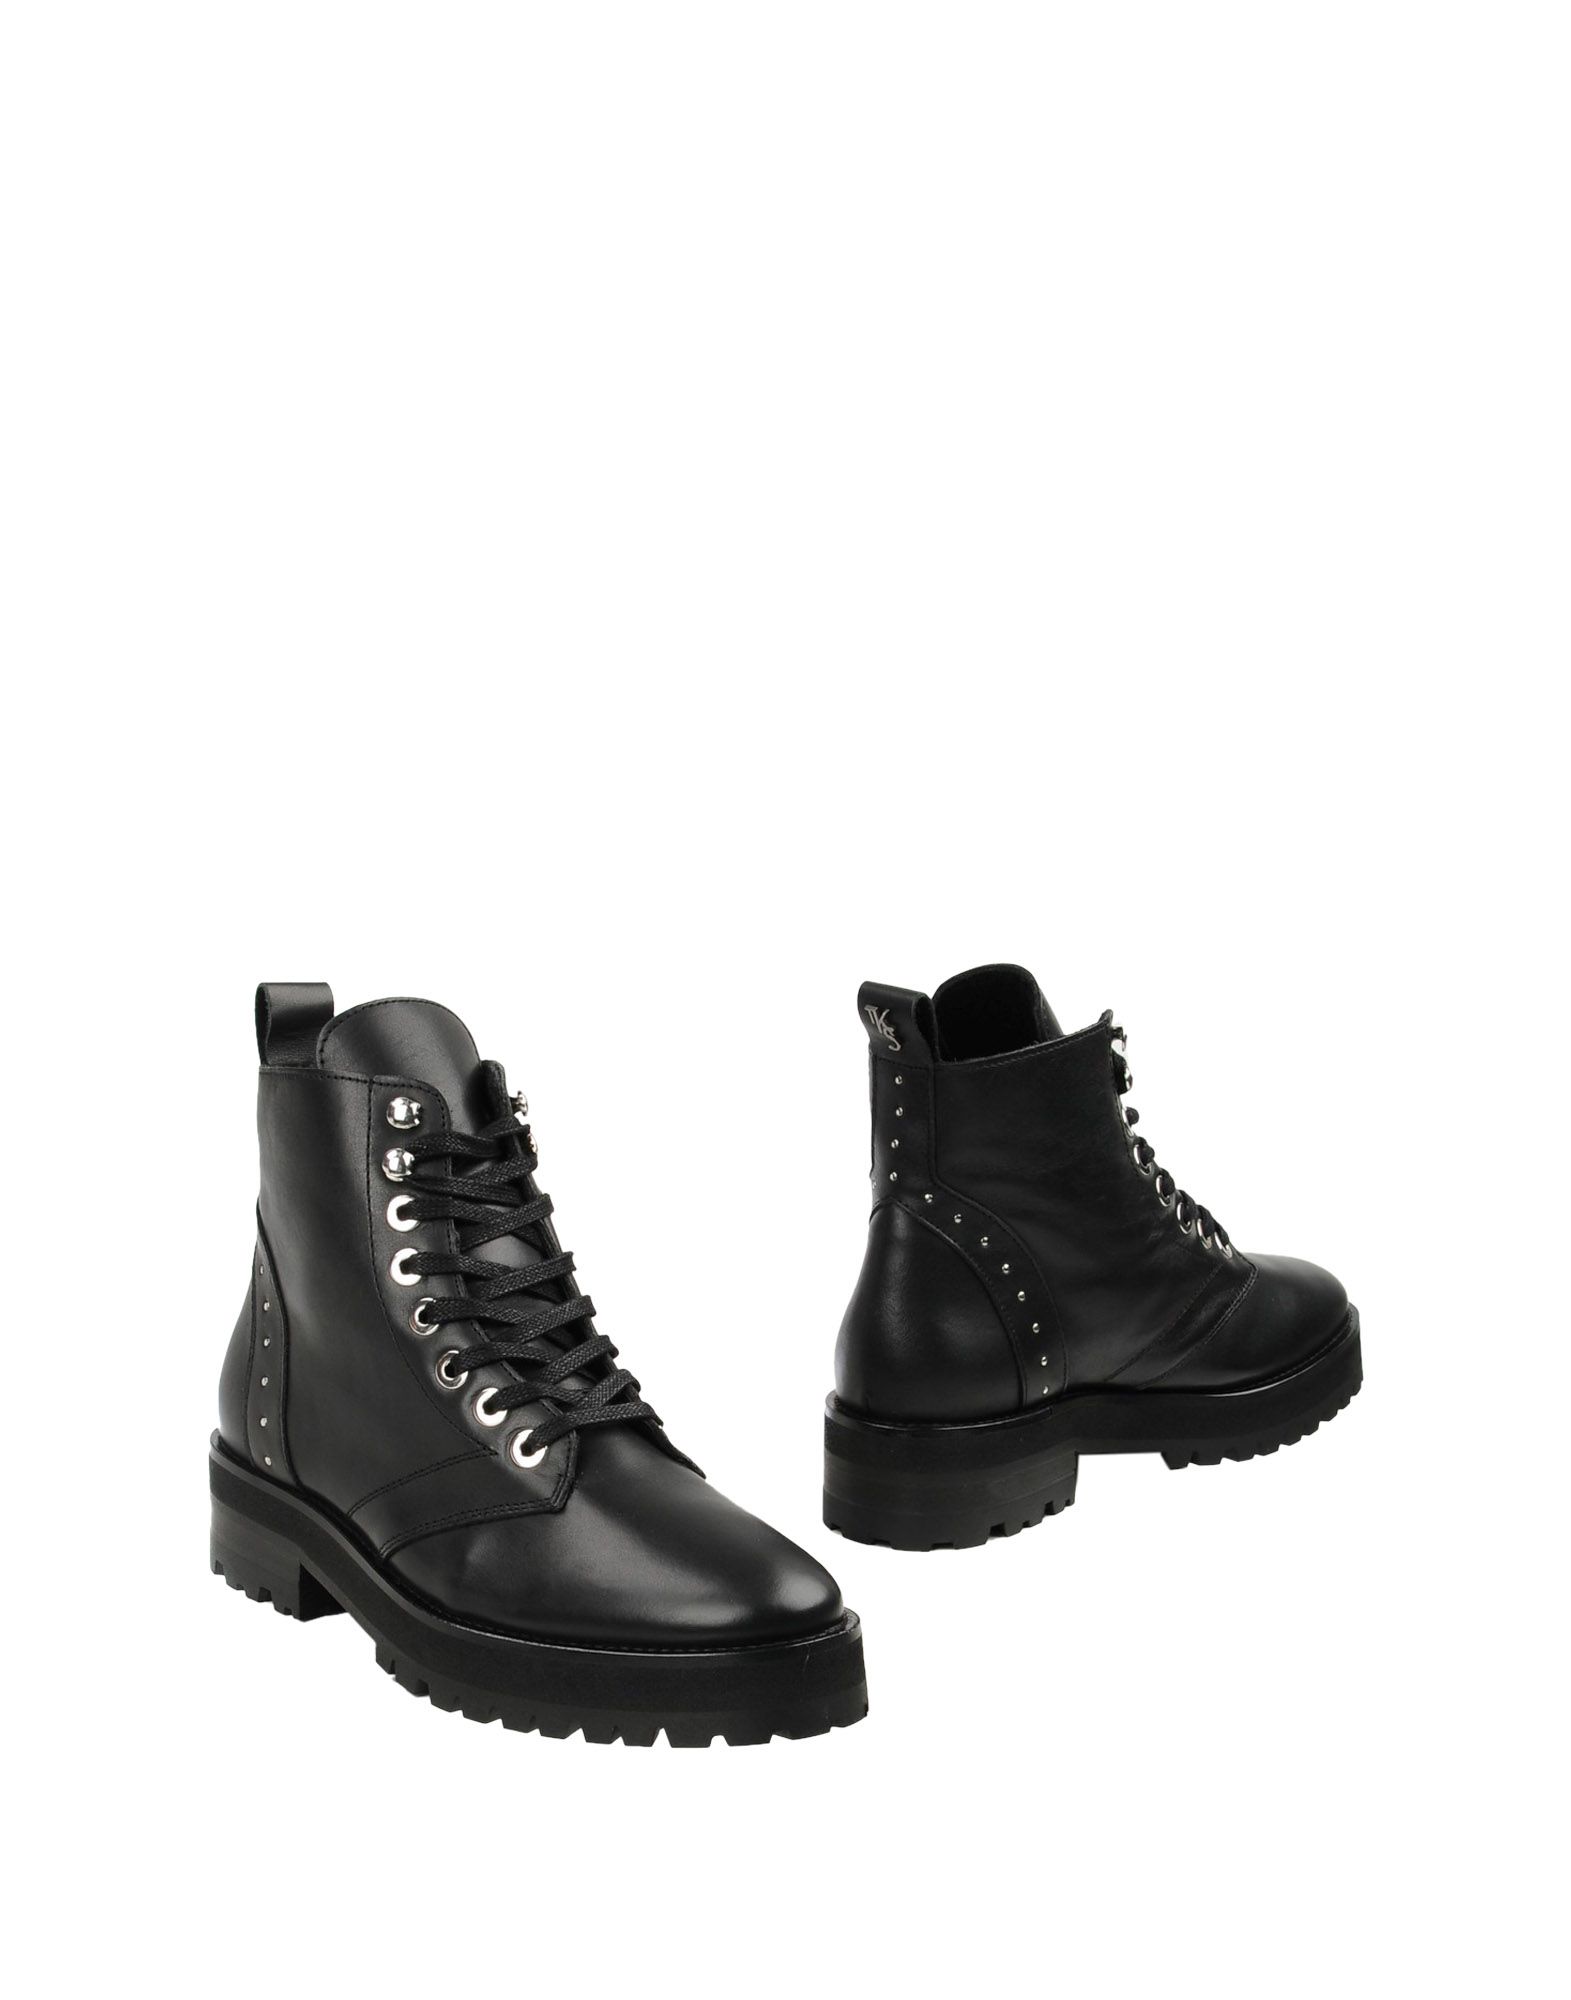 THE KOOPLES SPORT Ankle Boots, Black | ModeSens